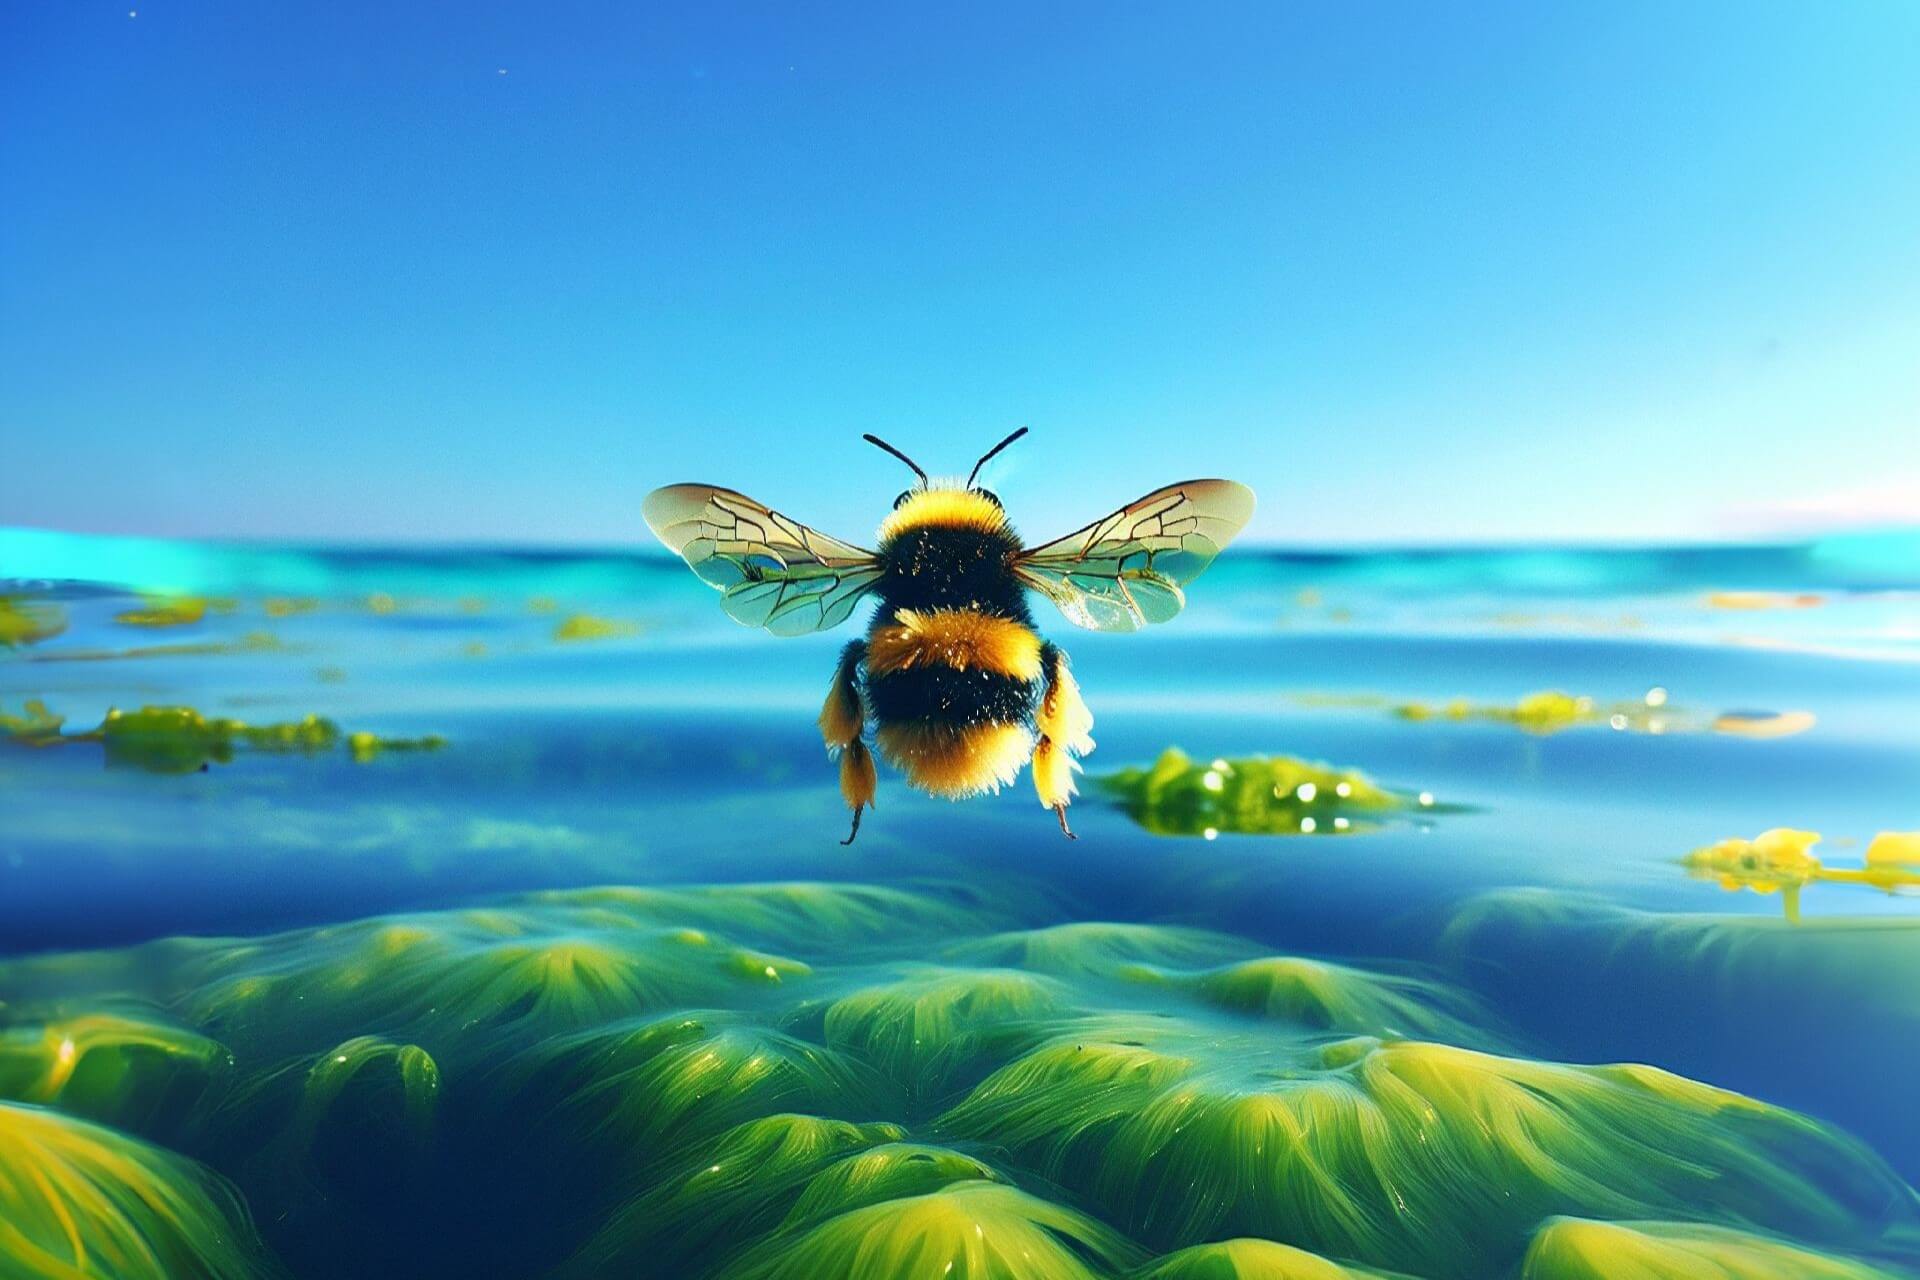 An AI-generated image of a bee flying over seaweed, headed toward the horizon